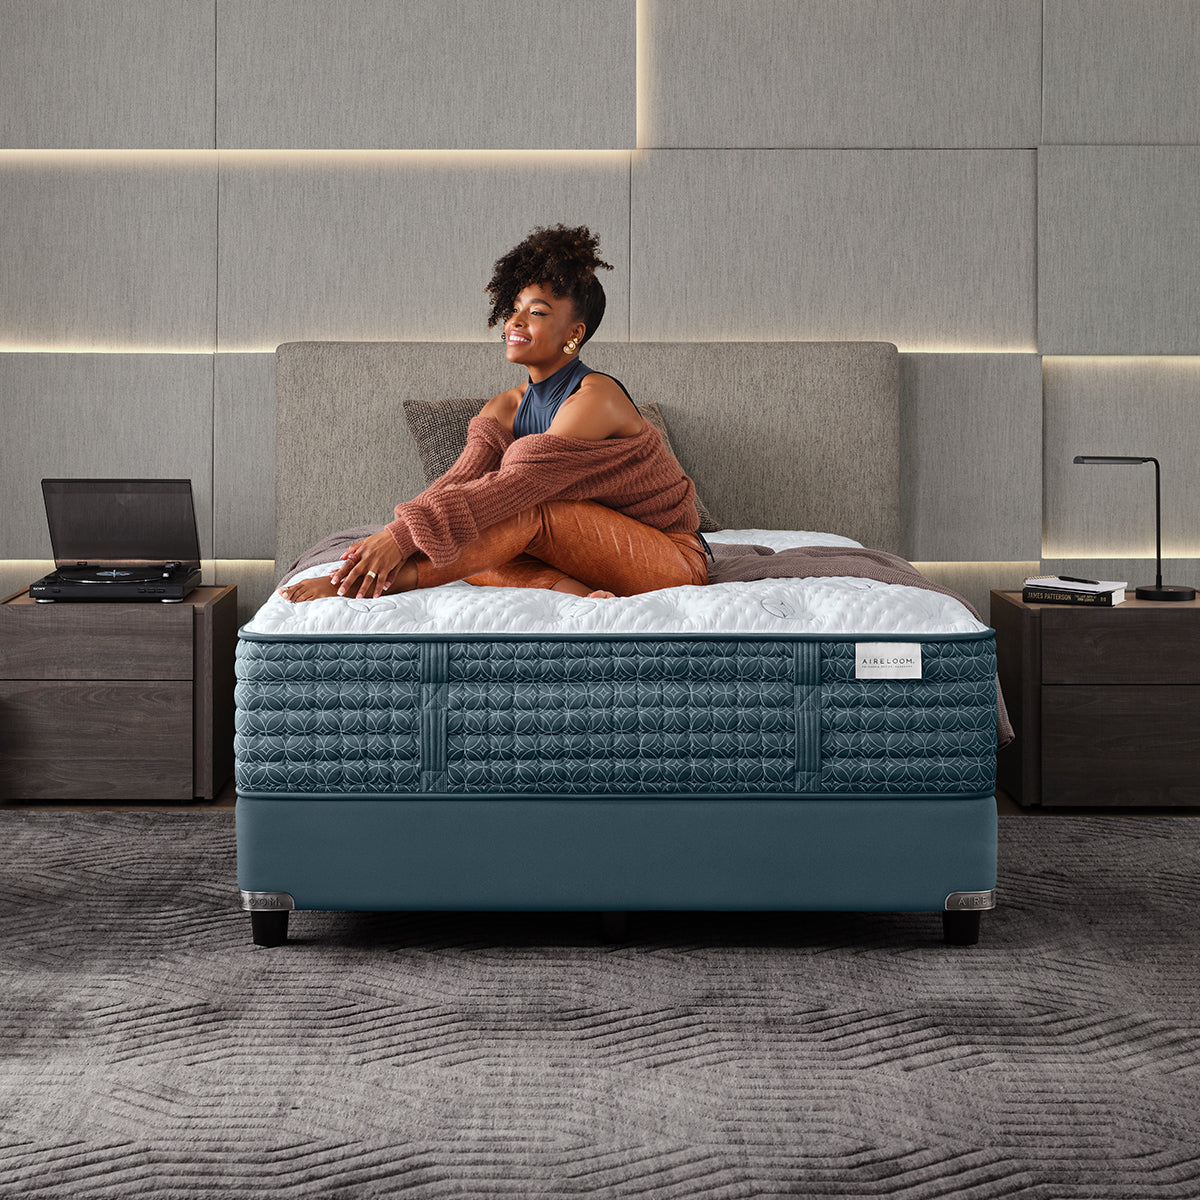 Woman Relaxing On An Aireloom Duet Luxury Firm Mattress In An Upscale Modern Minimalist Apartment Bedroom